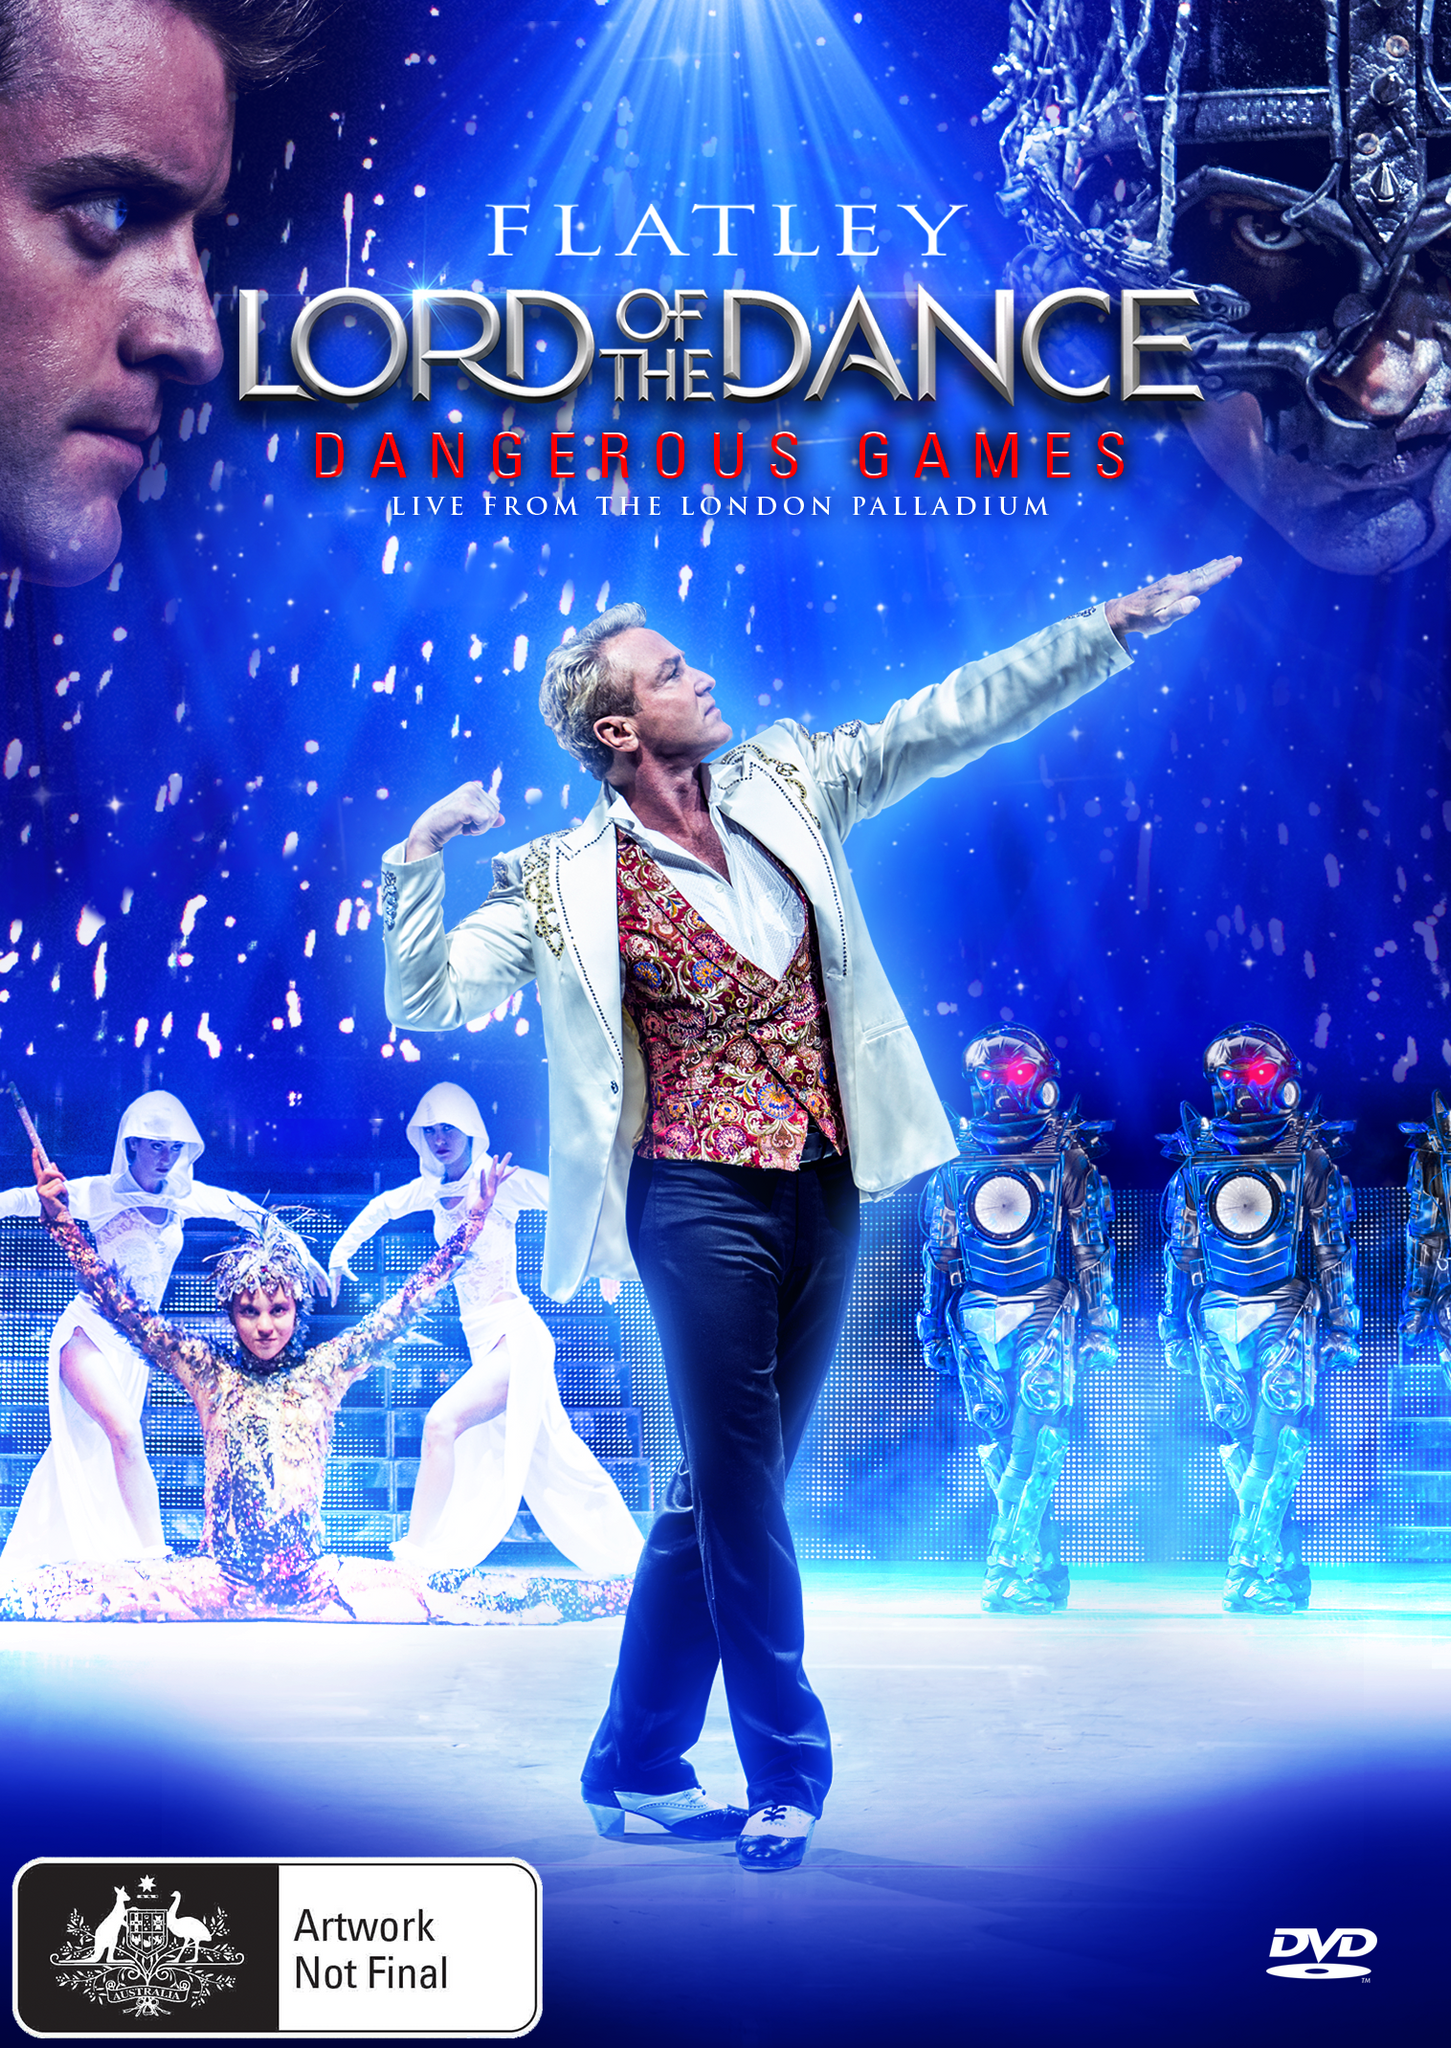 MICHAEL FLATLEY'S LORD OF THE DANCE: DANGEROUS GAMES